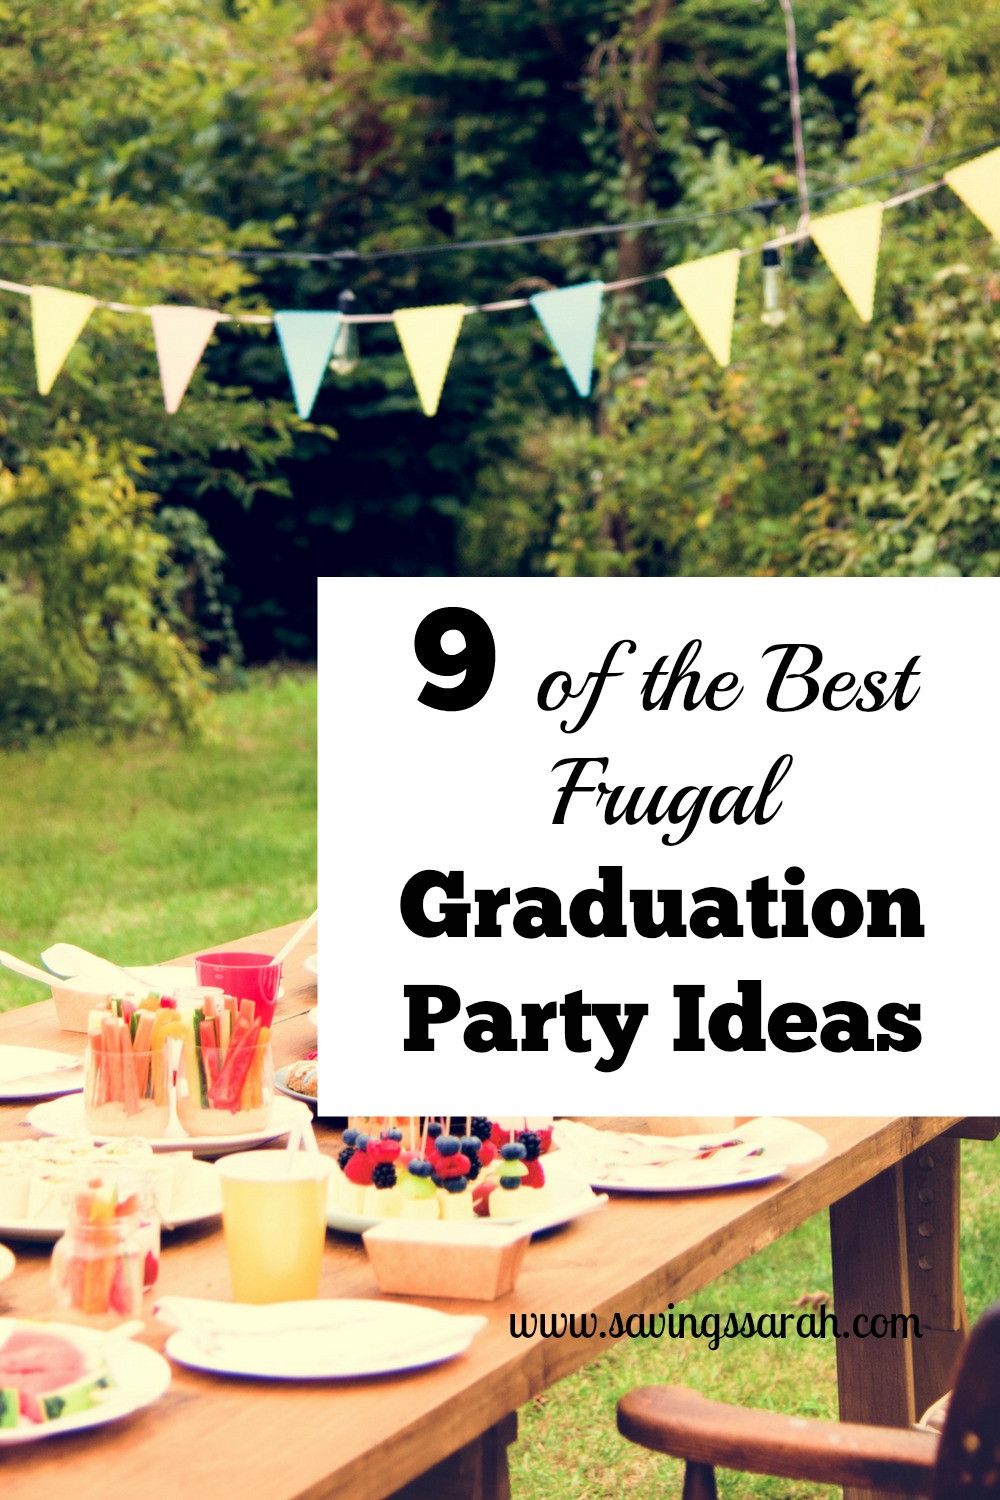 Party Ideas For Graduation Party
 9 the Best Frugal Graduation Party Ideas Earning and